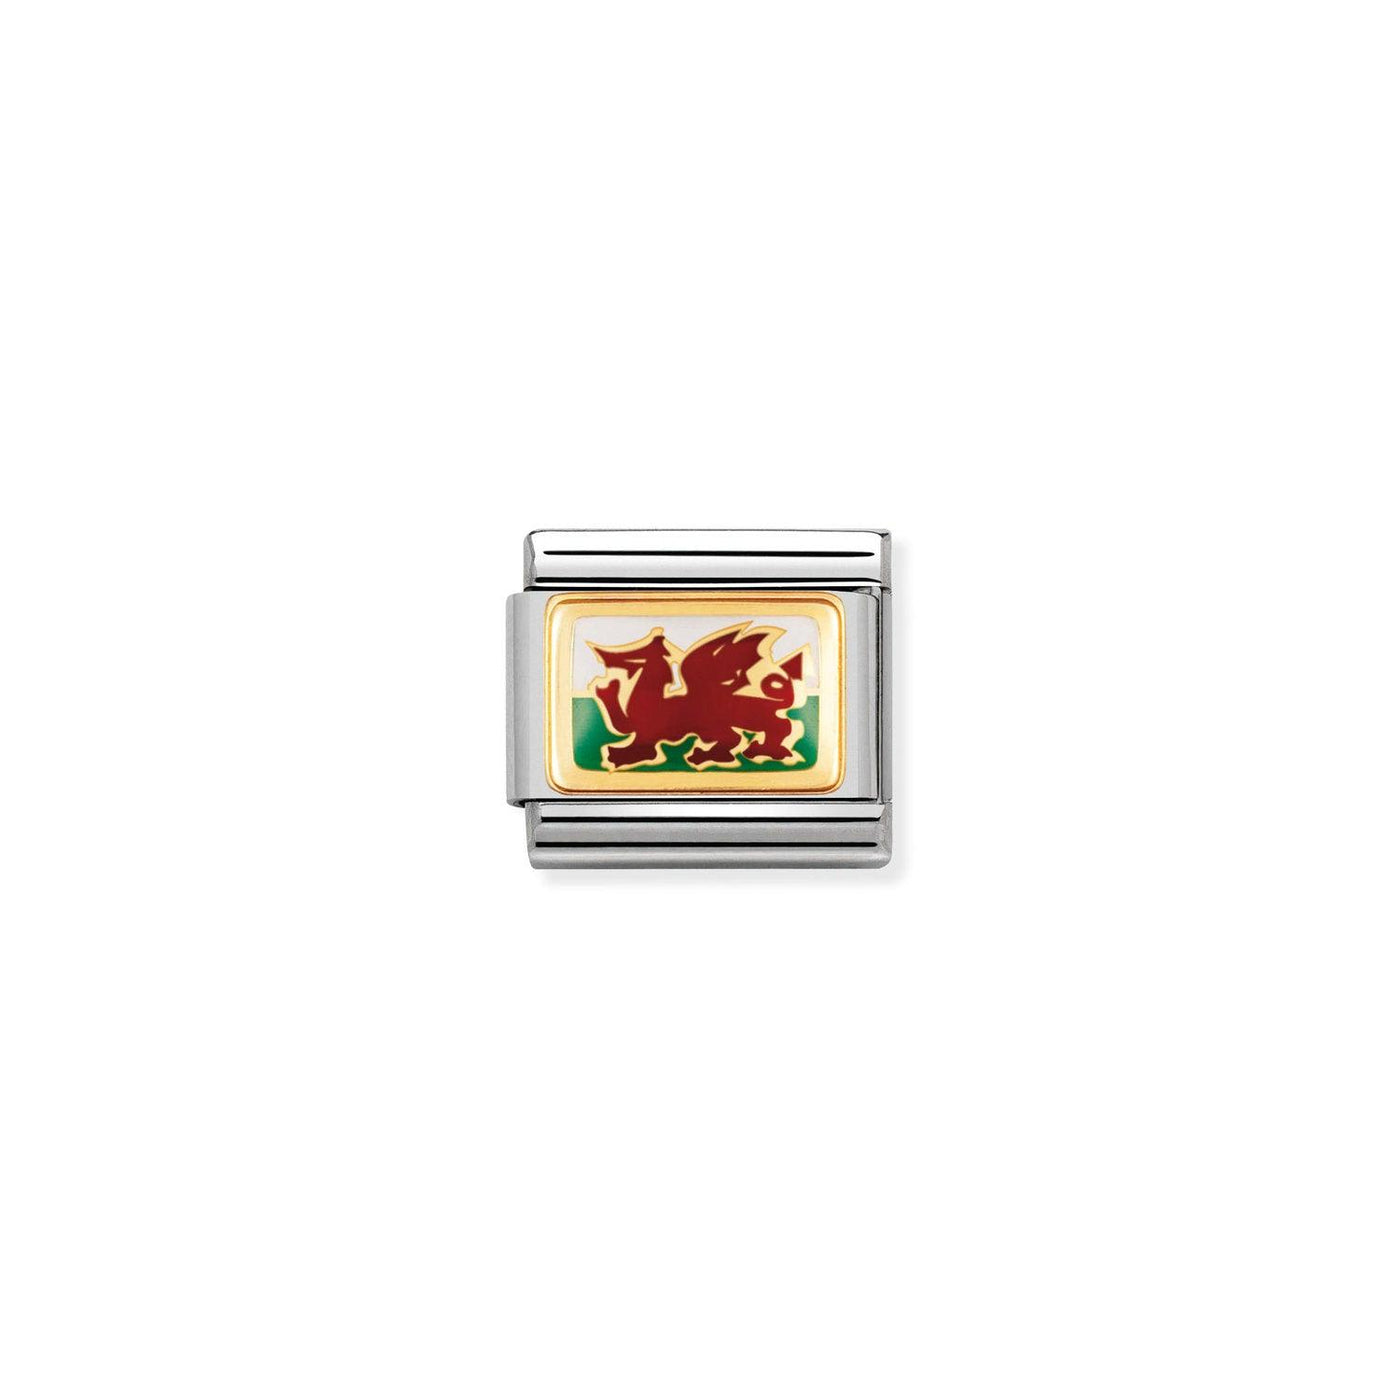 Nomination Classic Wales Flag 18ct Gold Charm - Rococo Jewellery